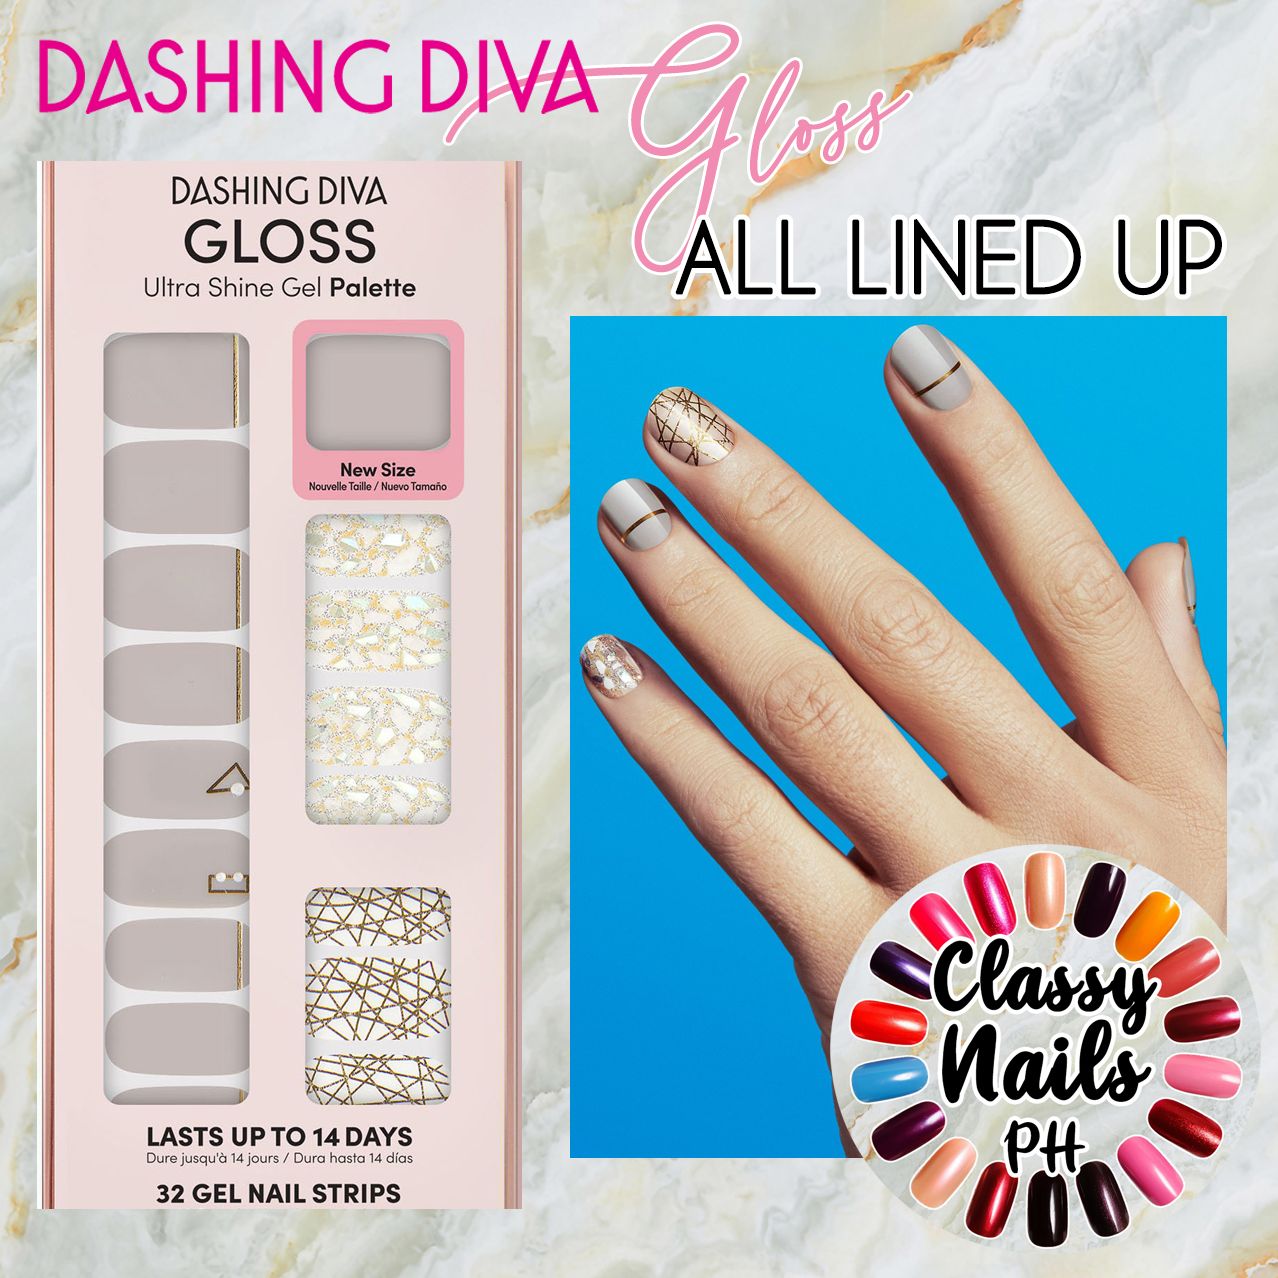 All Lined Up • Dashing Diva • GLOSS Palette • Nail Strips • Manicure •  Classy Nails PH | Lazada PH